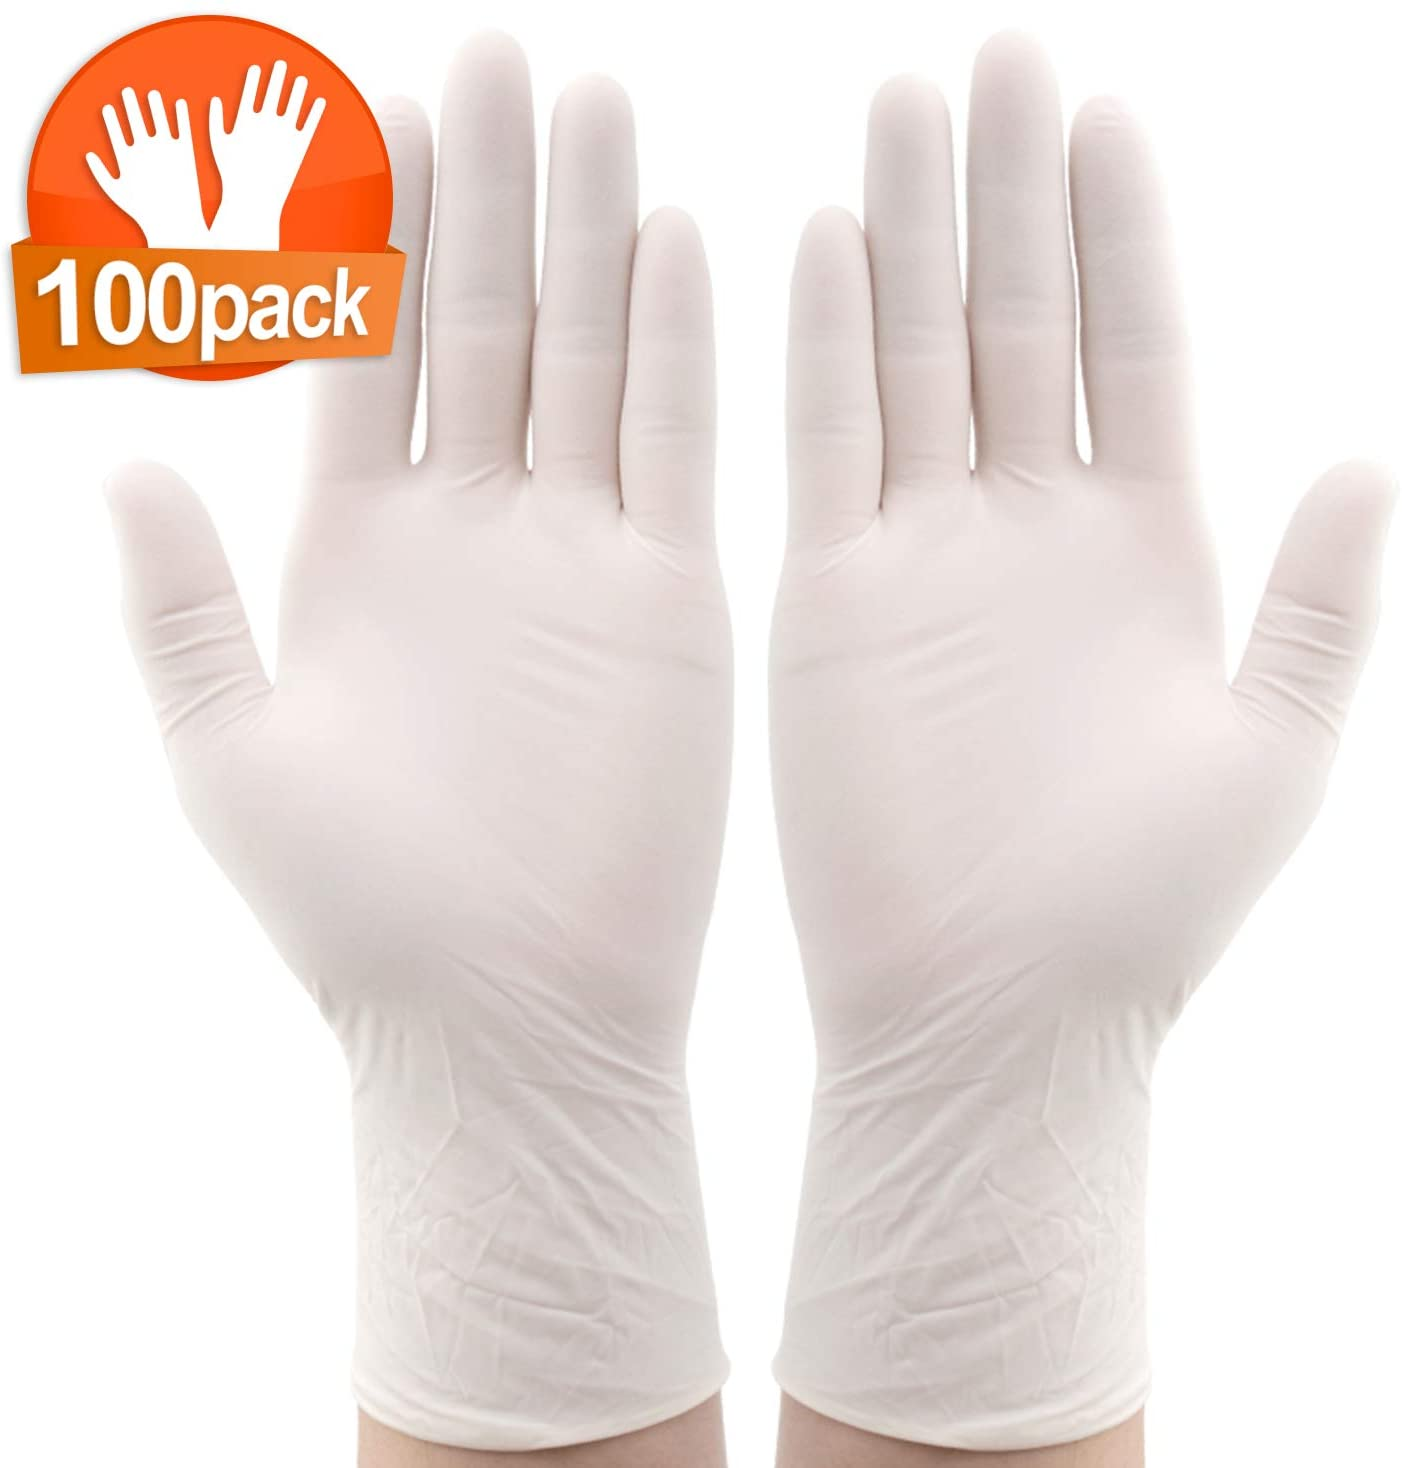 IPReereg-100Pcs-Disposable-Nitrile-BBQ-Gloves-Waterproof-Safety-Glove-Disposable-Gloves-Protective-G-1656838-1